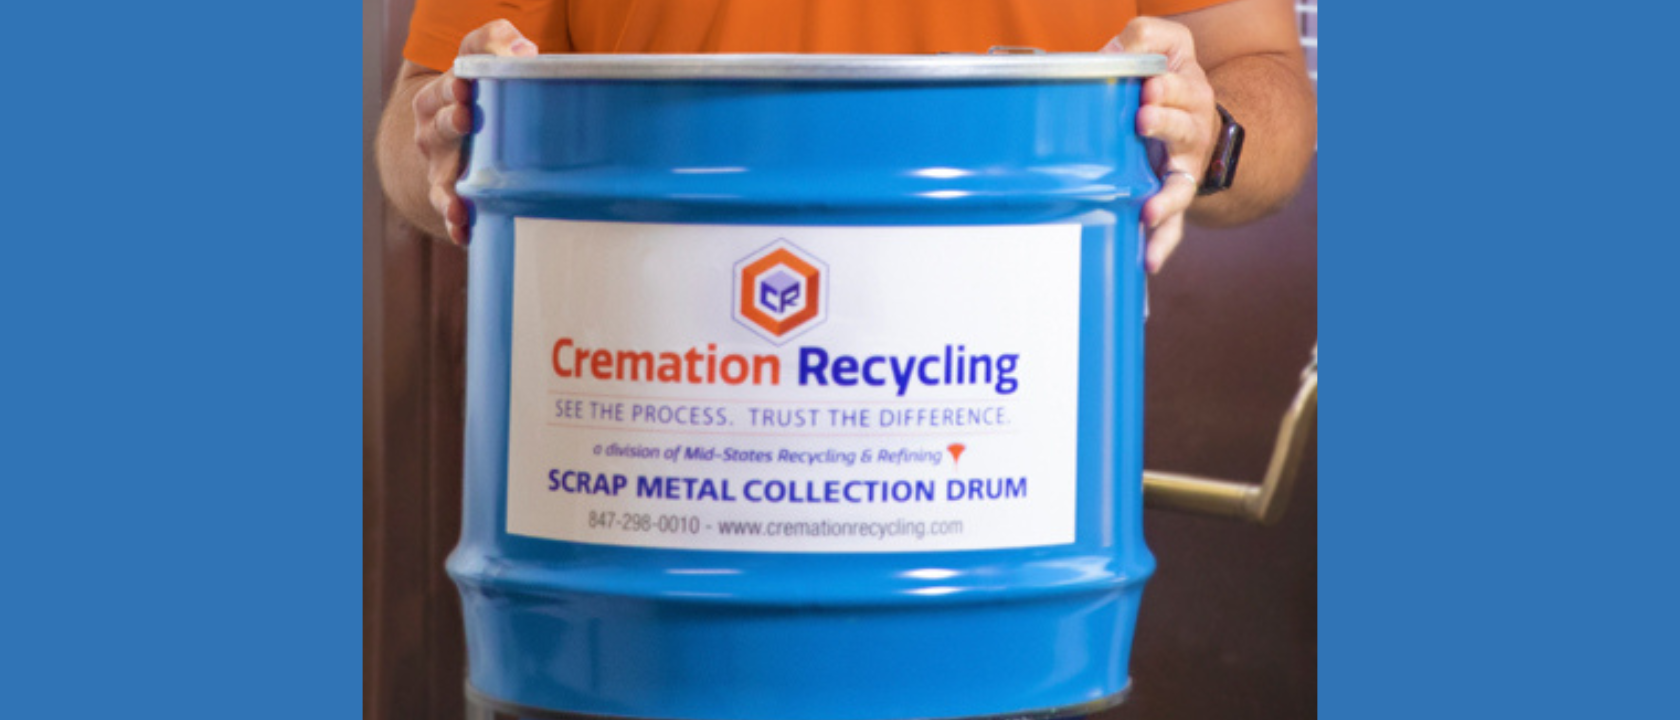 Cremation Recycling Drum